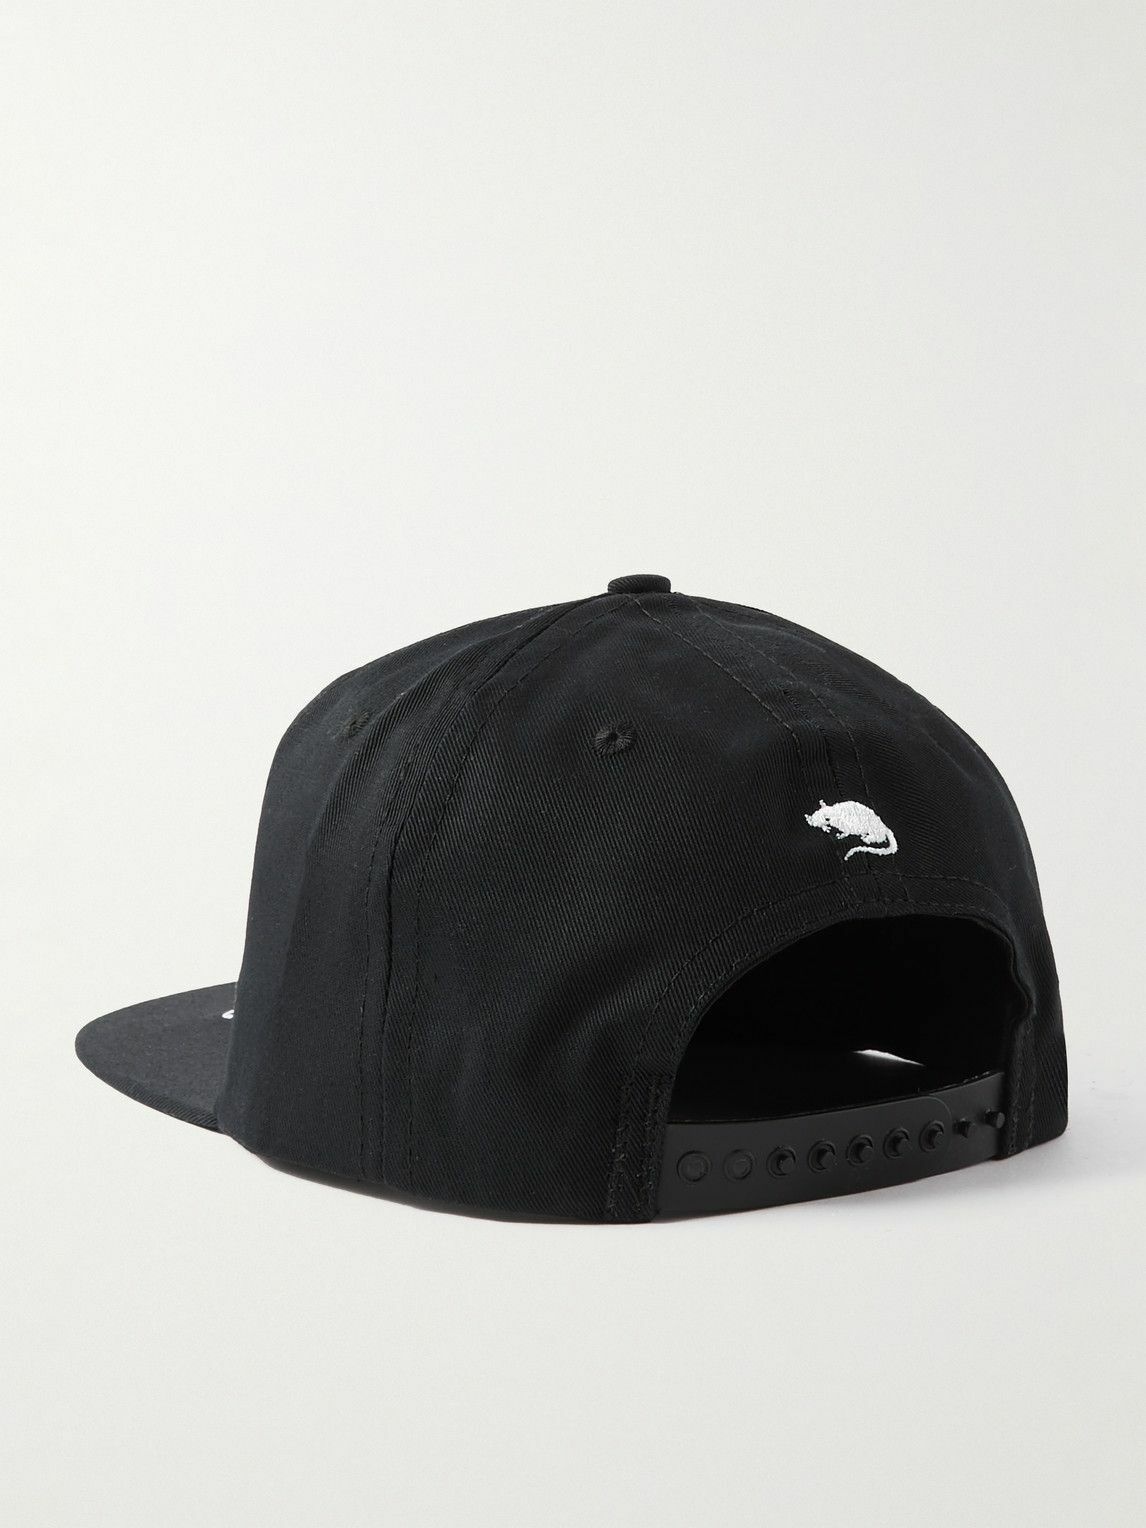 Stray Rats - Wicked Twisted Logo-Embroidered Cotton-Twill Hat